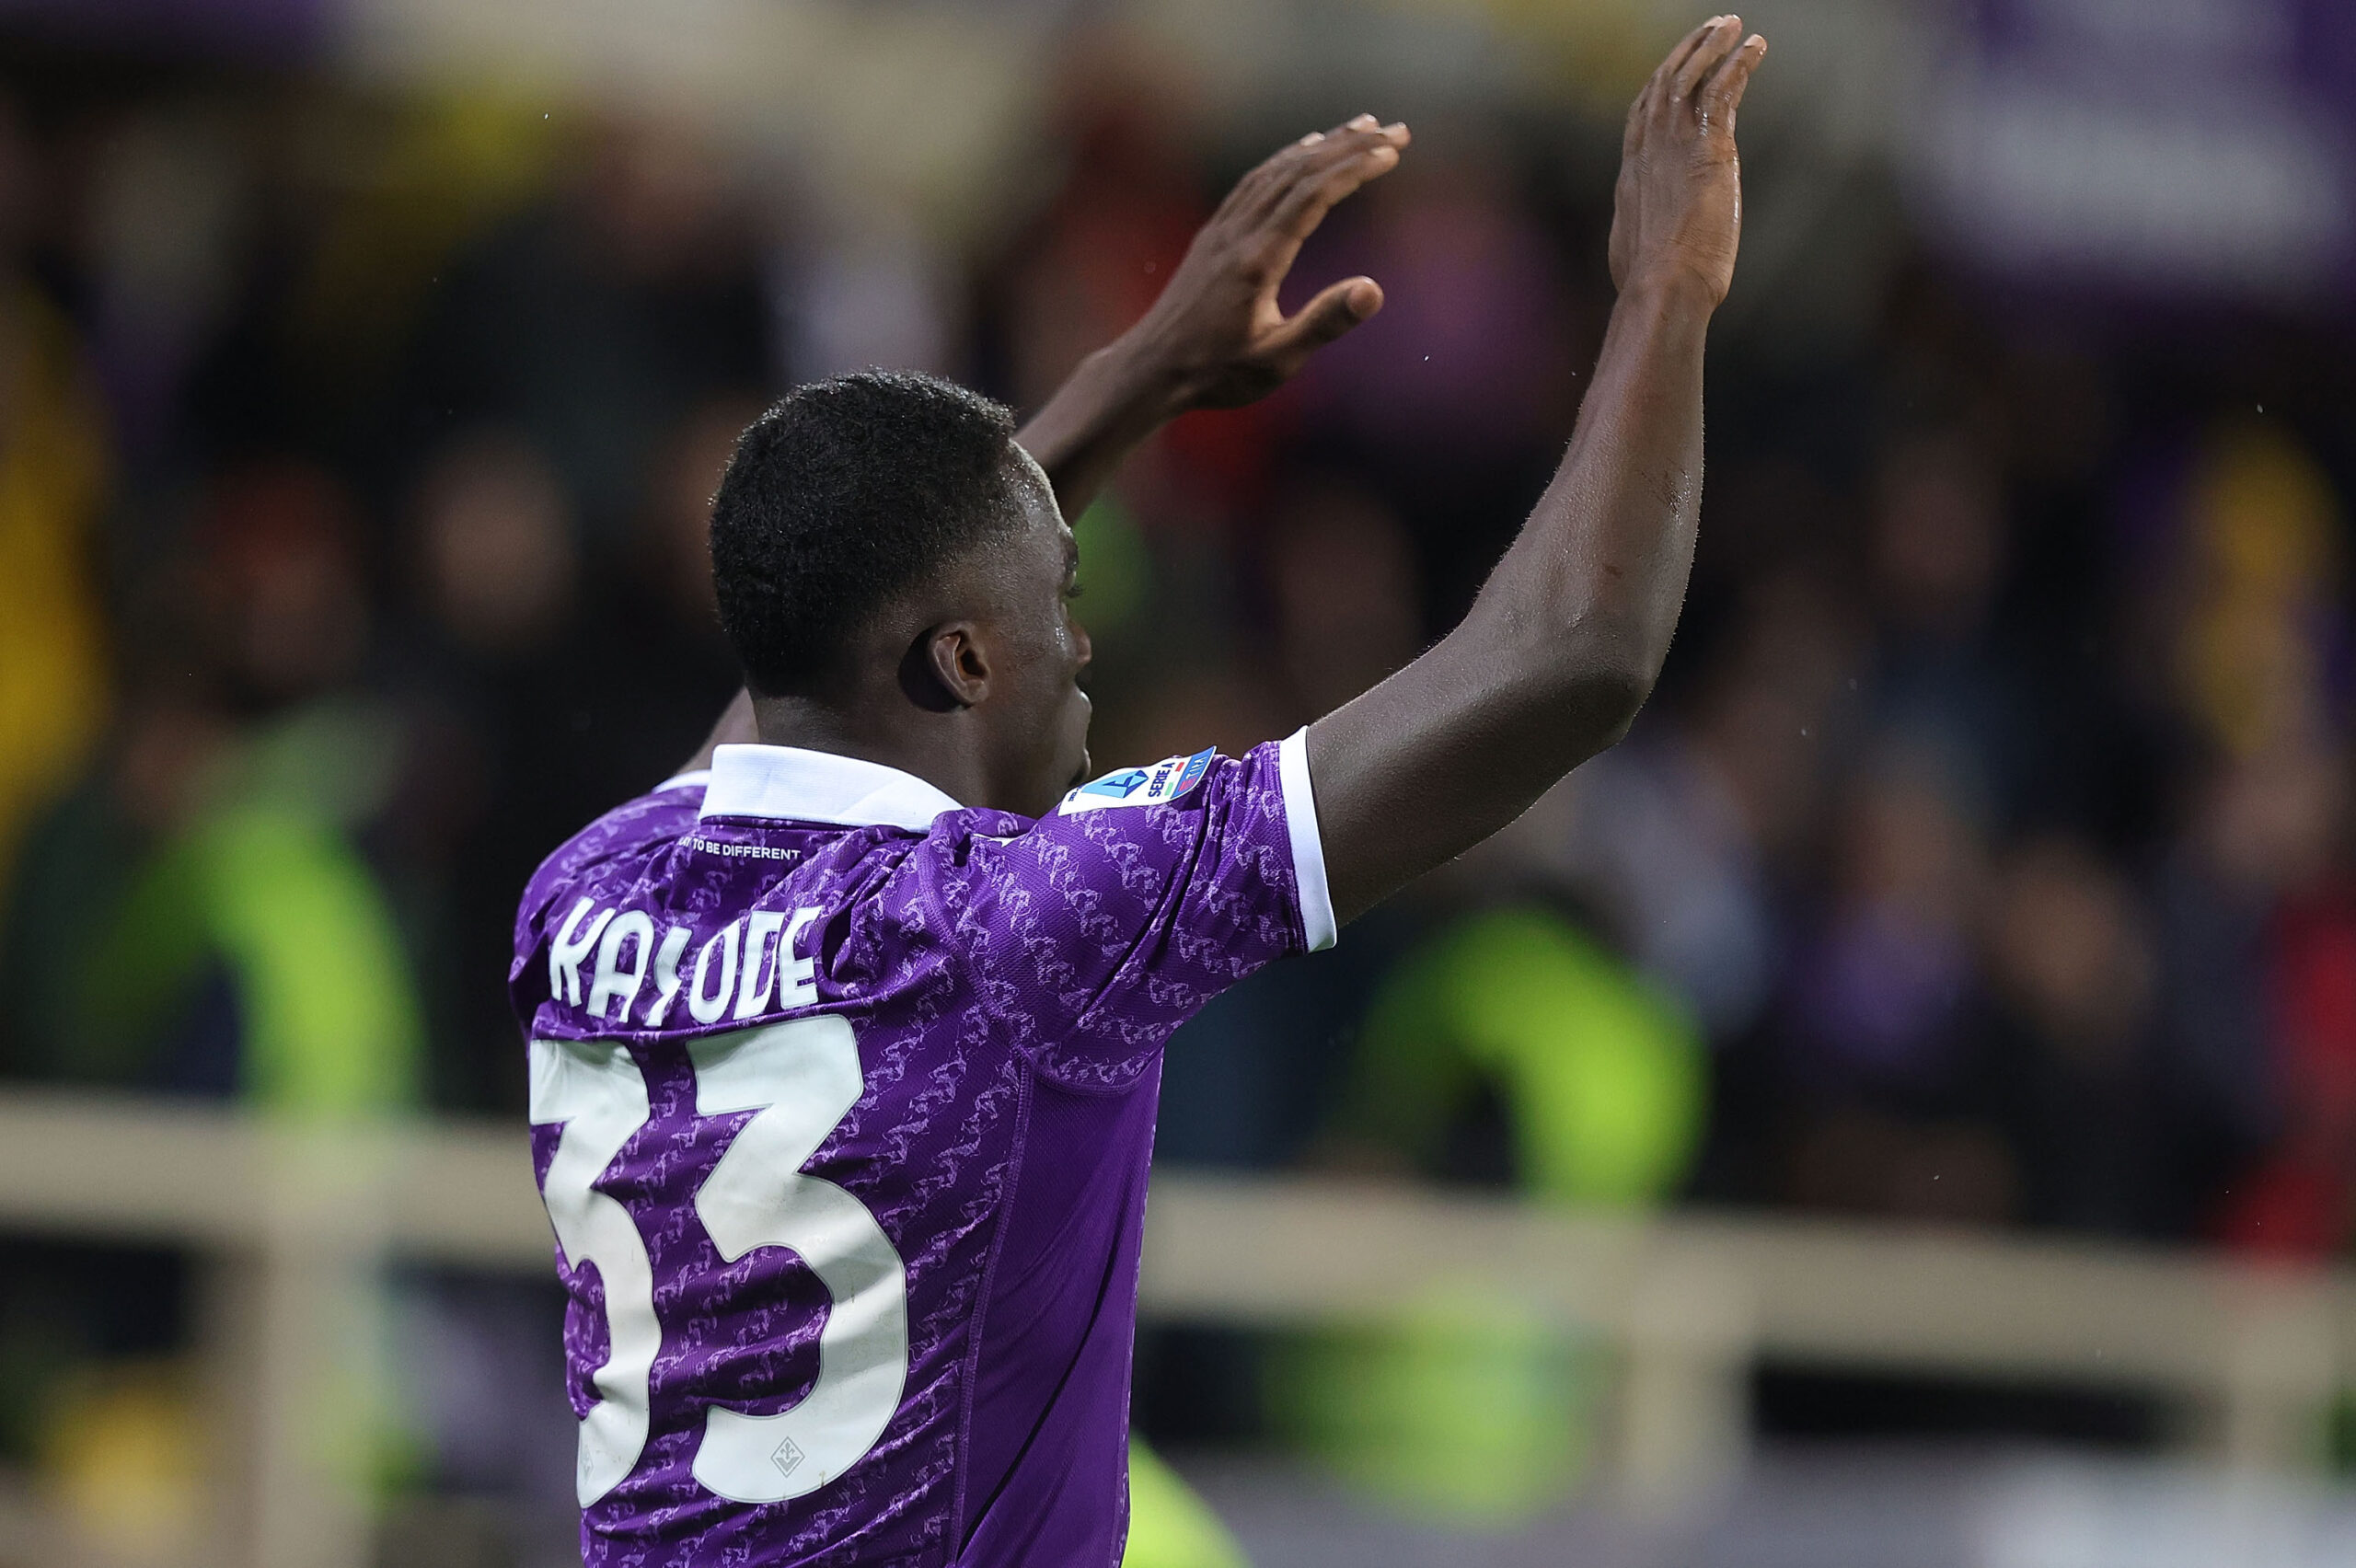 Samir Handanovic, who now works as a scout for Inter, was spotted in the stands of the recent clash between Fiorentina and Lazio to watch Michael Kayode.